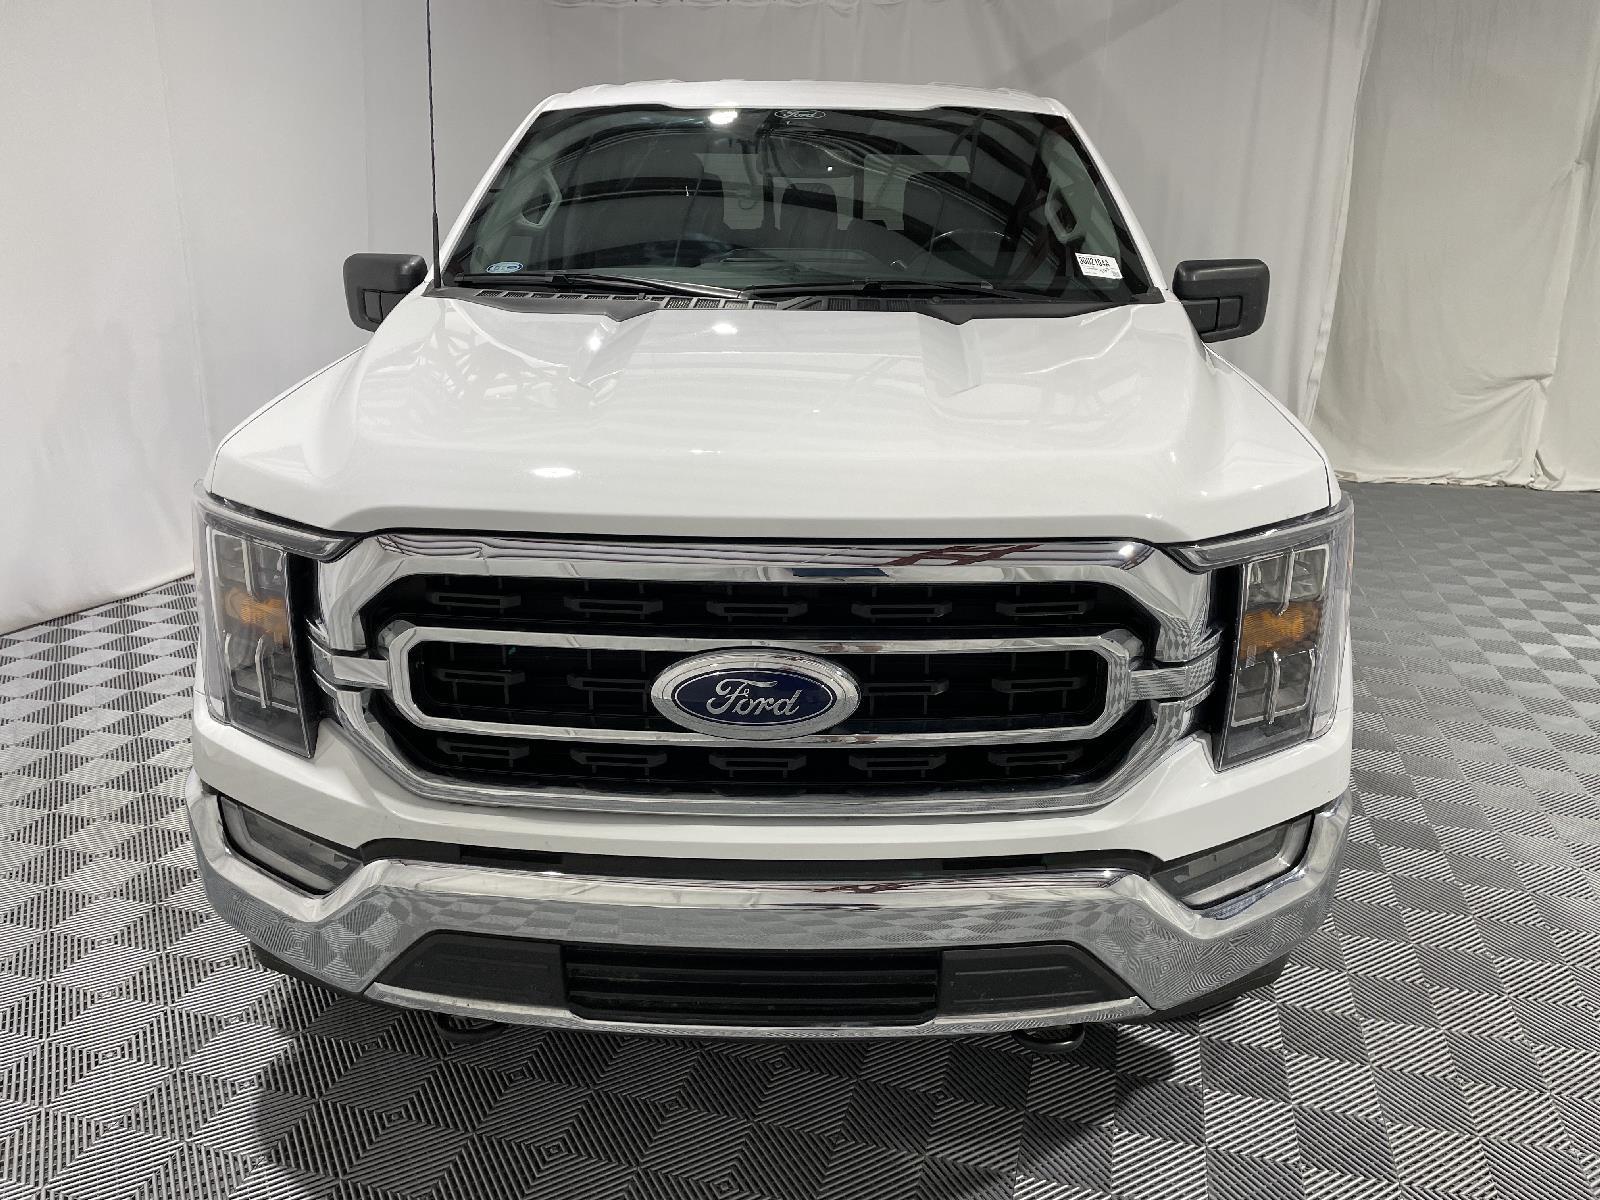 Used 2022 Ford F-150 XLT Crew Cab Truck for sale in St Joseph MO